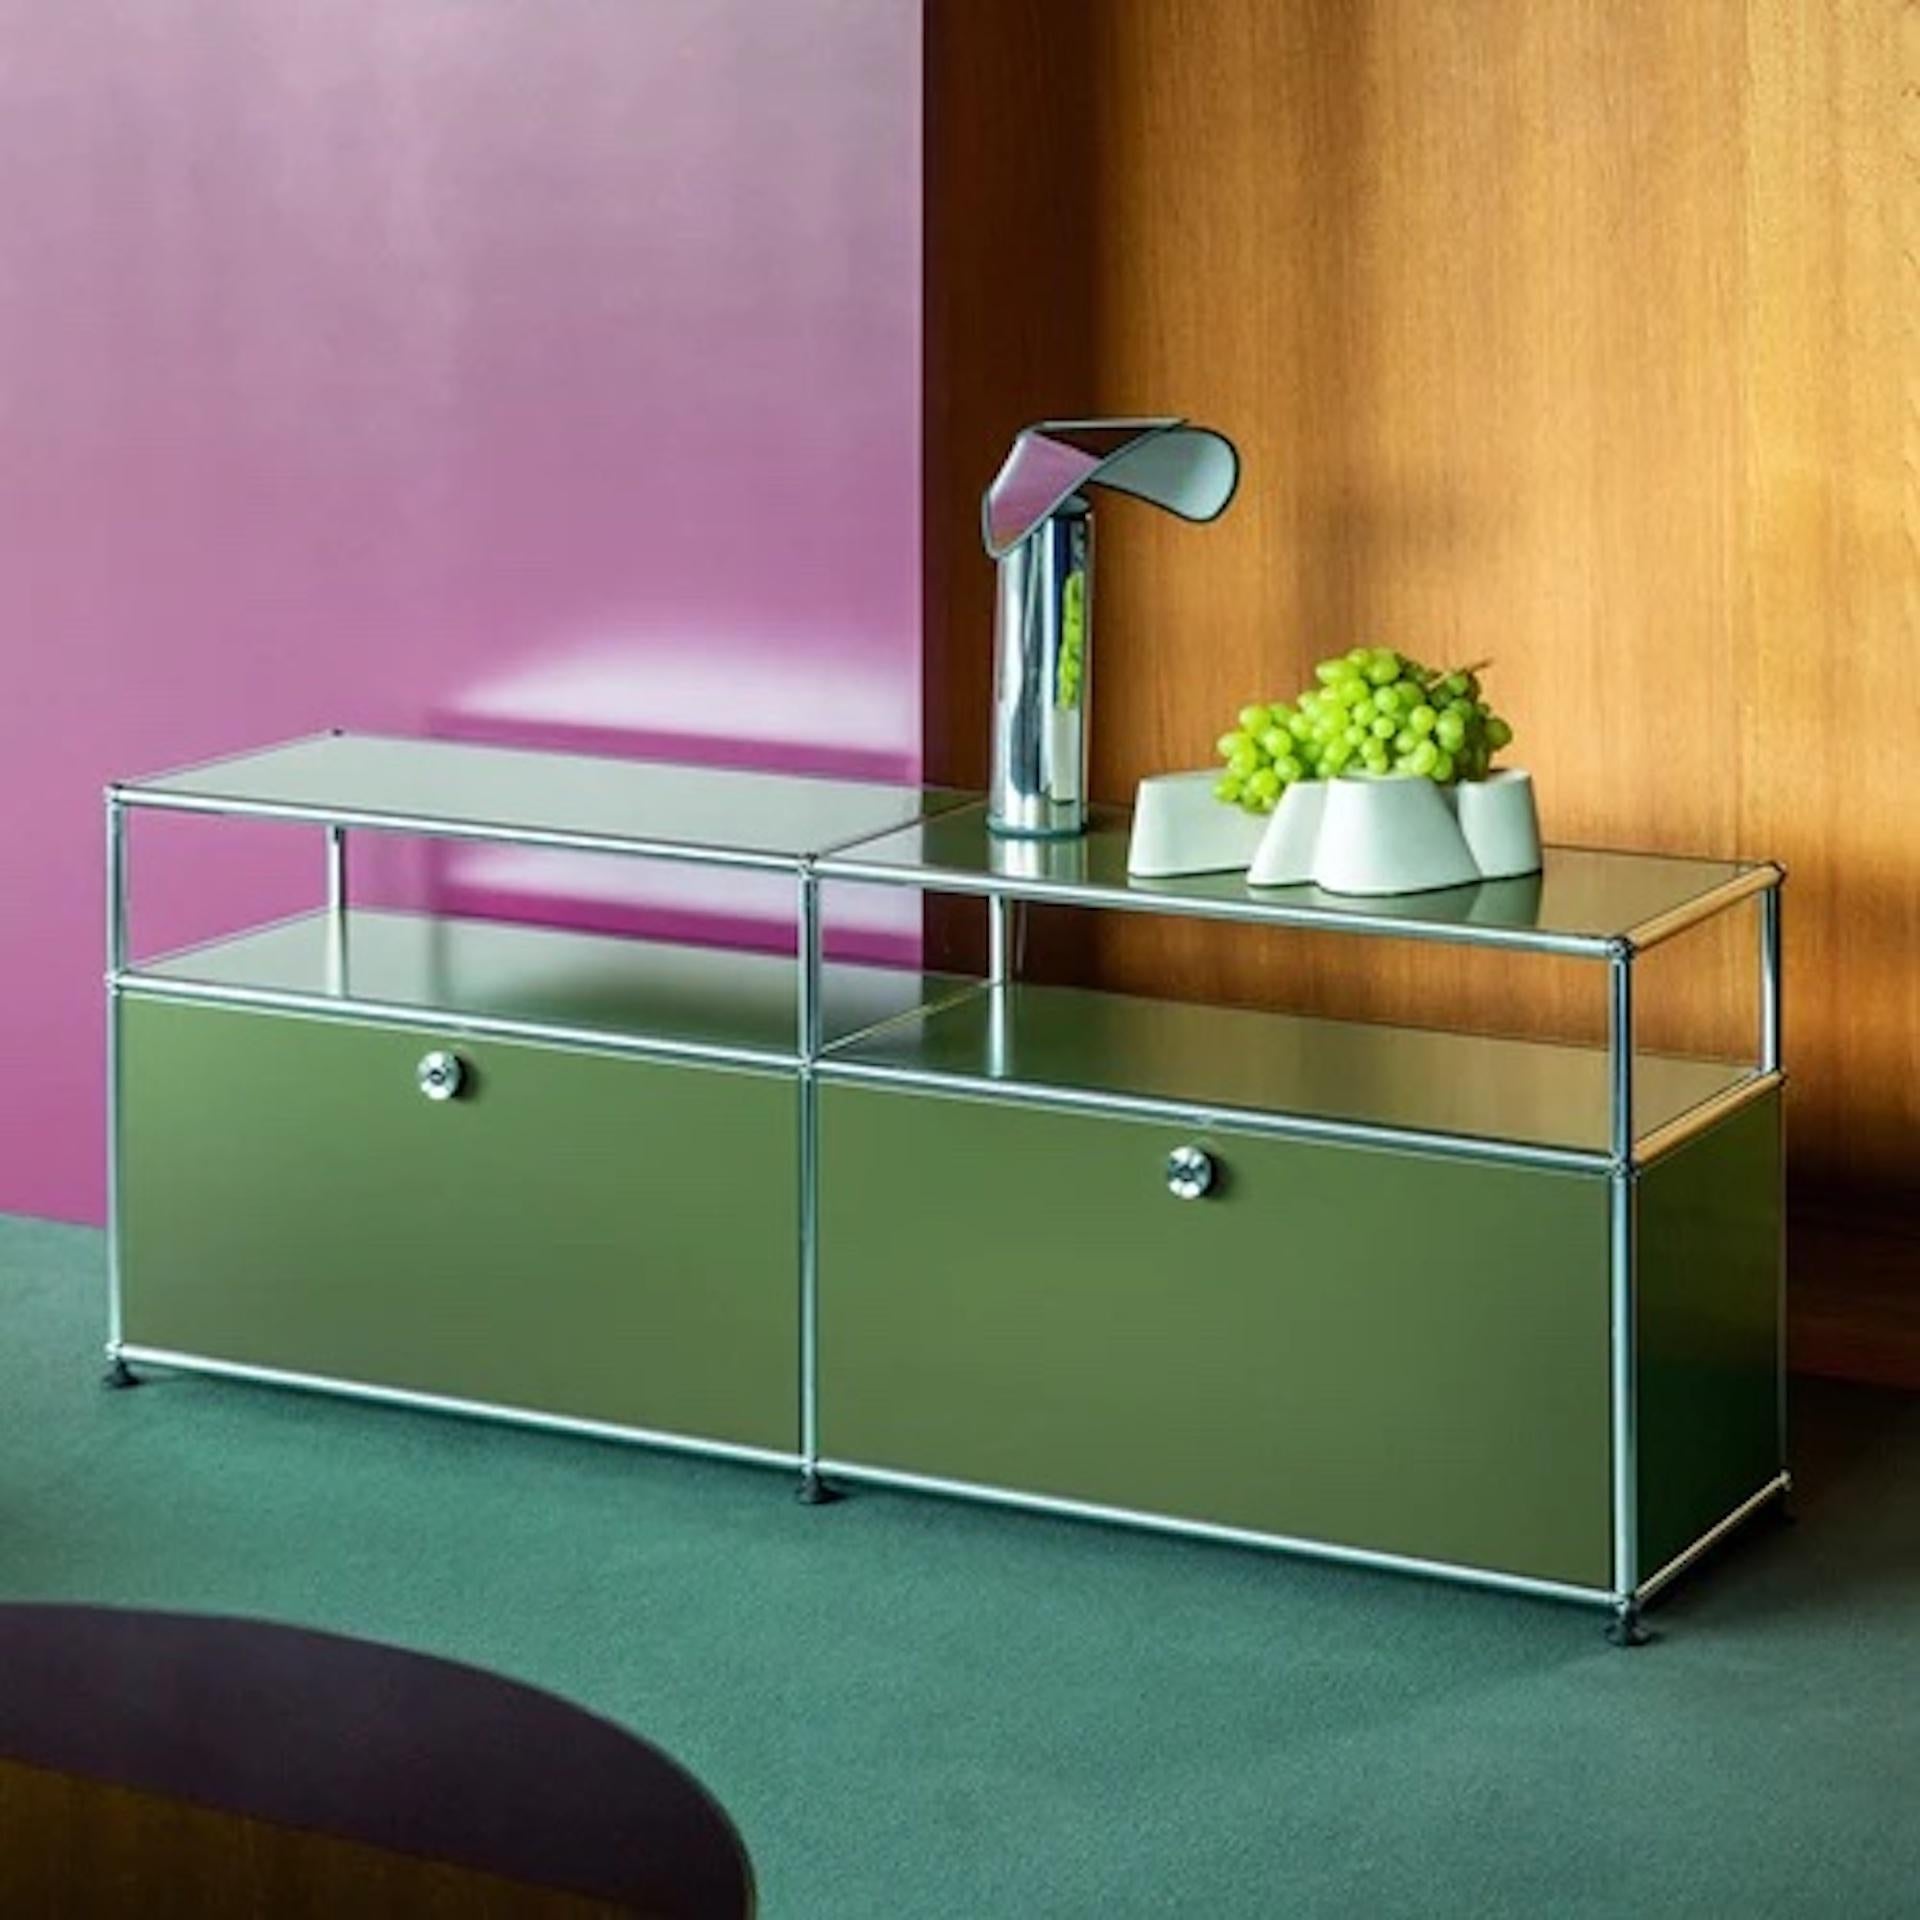 Special Edition Olive Green
Media storage credenza with two drop down doors that lock with the twist of a coin. Cable cut out is included.
The USM Haller system is made of powder-coated steel panels and chromed steel frame. GREENGUARD and Cradle to